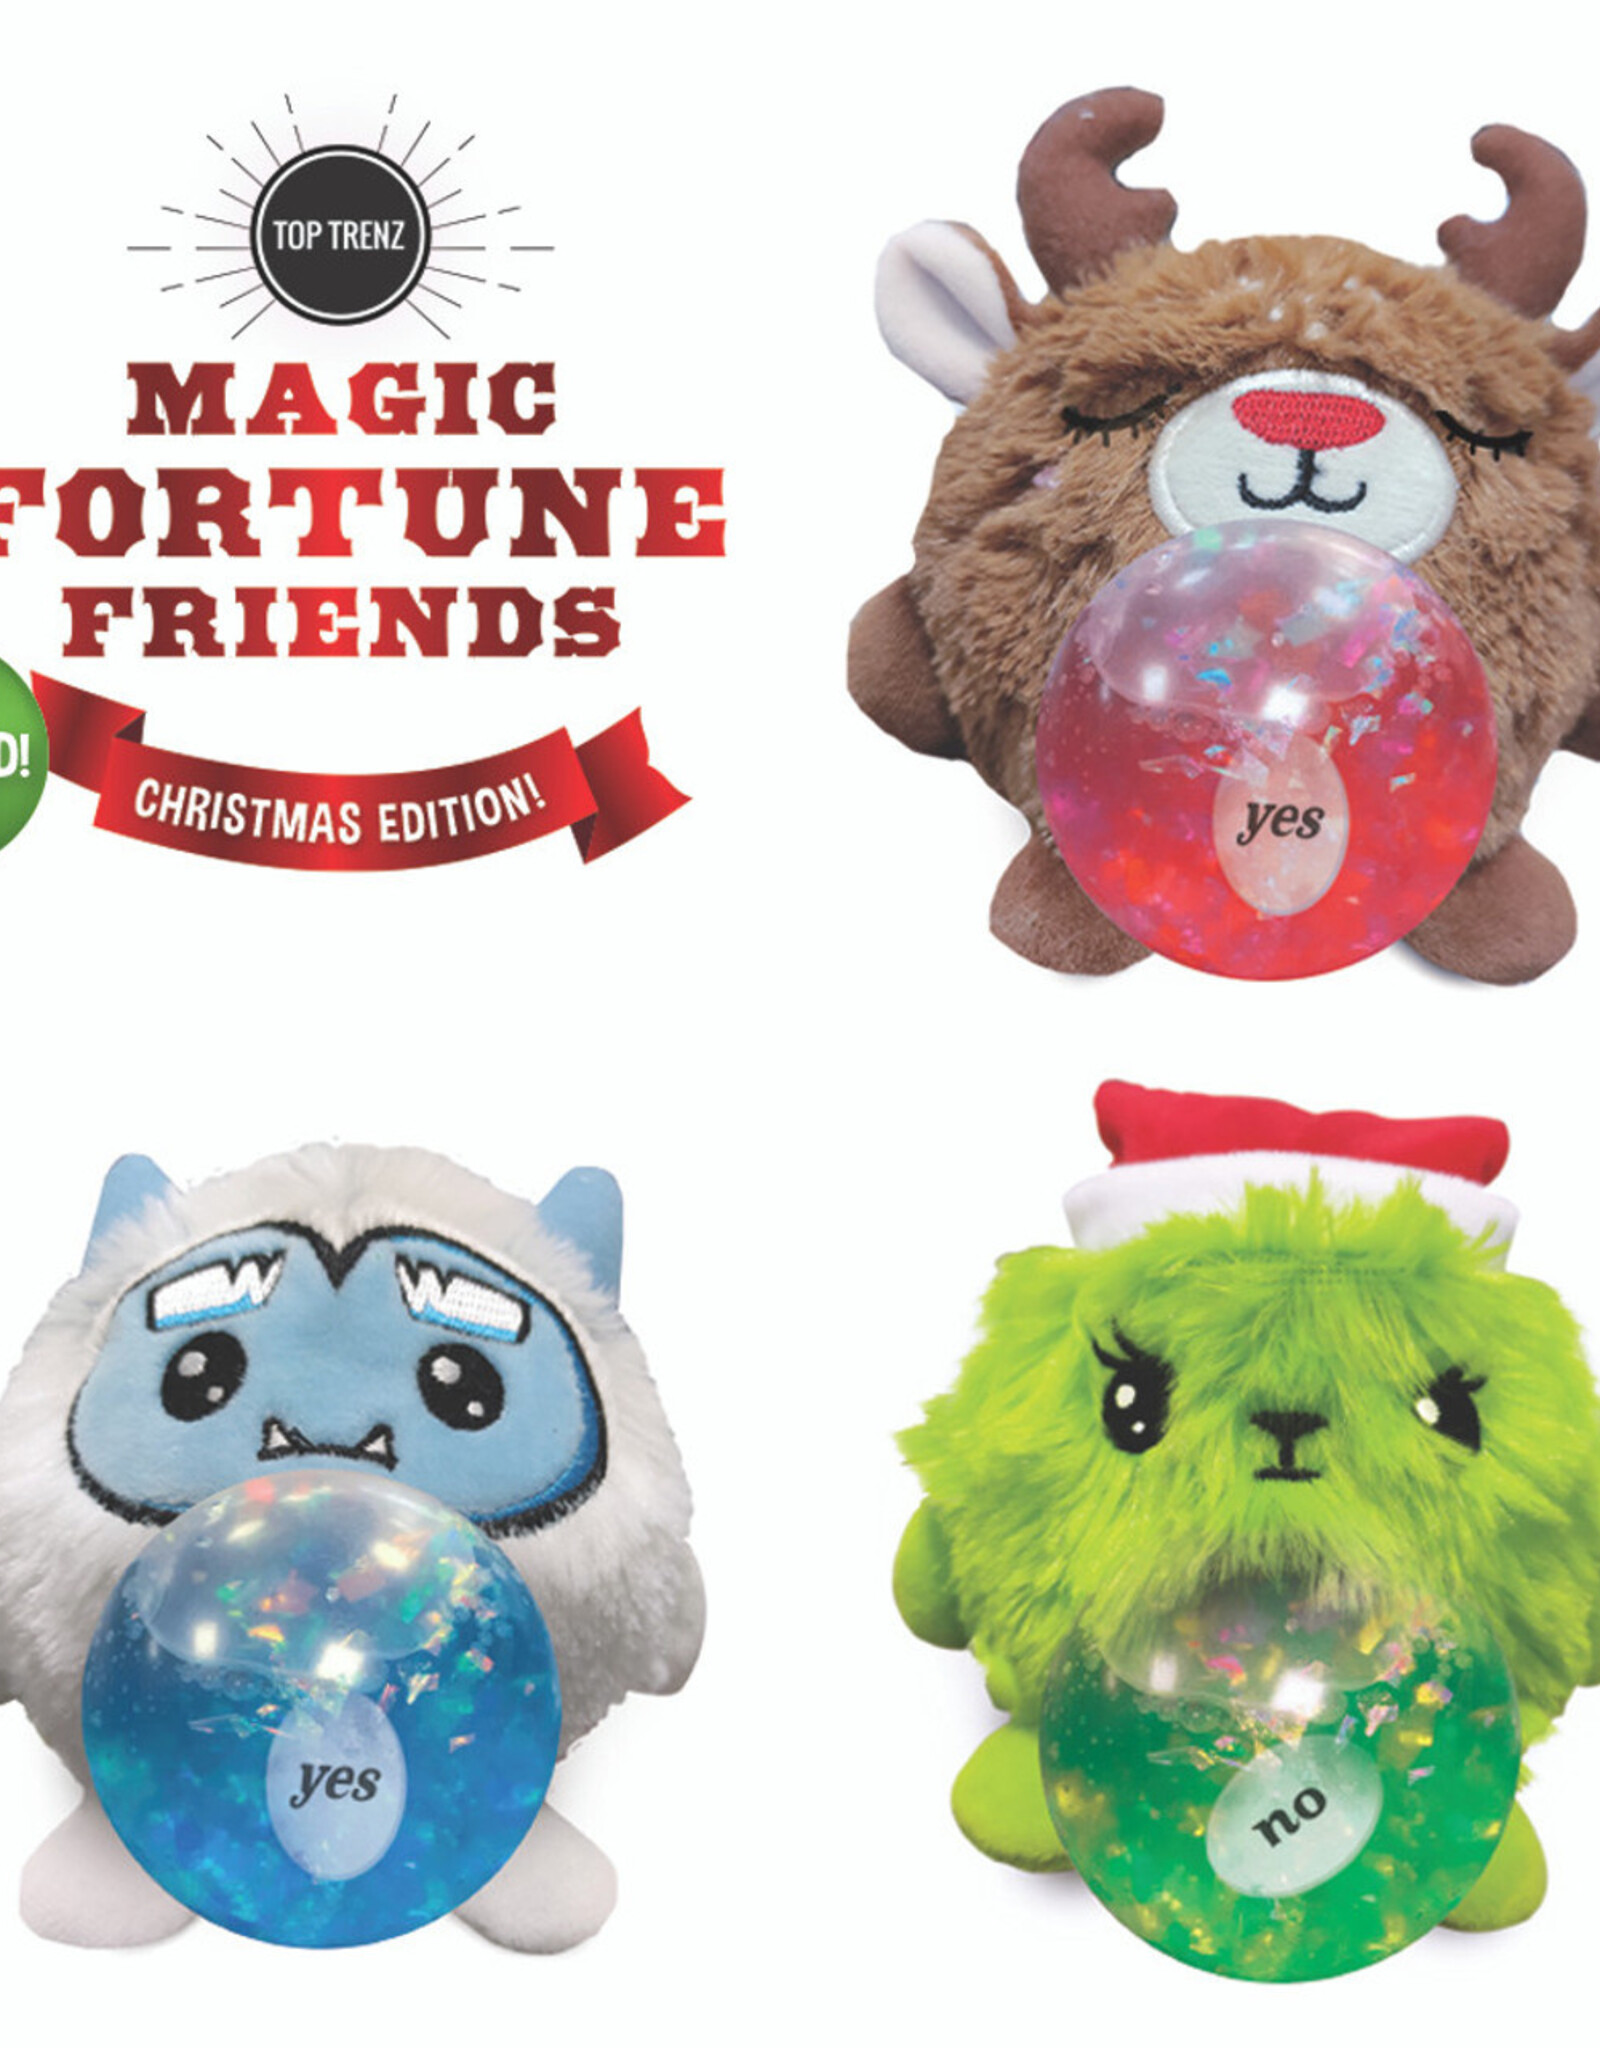 Top Trenz Magic Fortune Friends - Holiday Edition